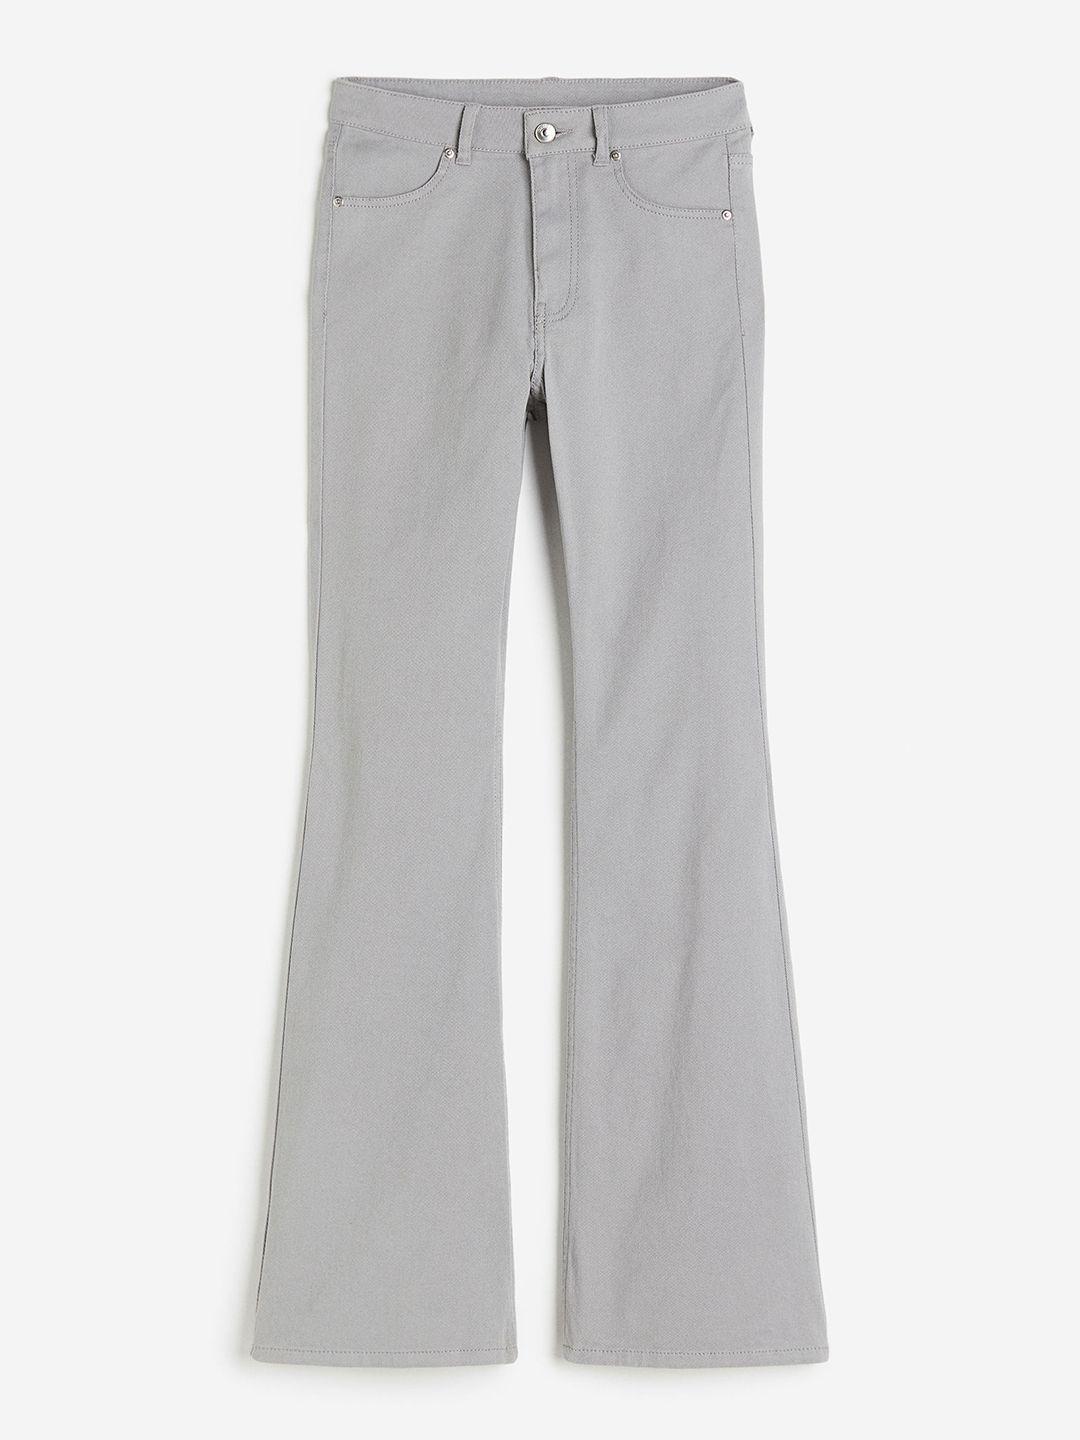 H&M Women Flared Twill Trousers